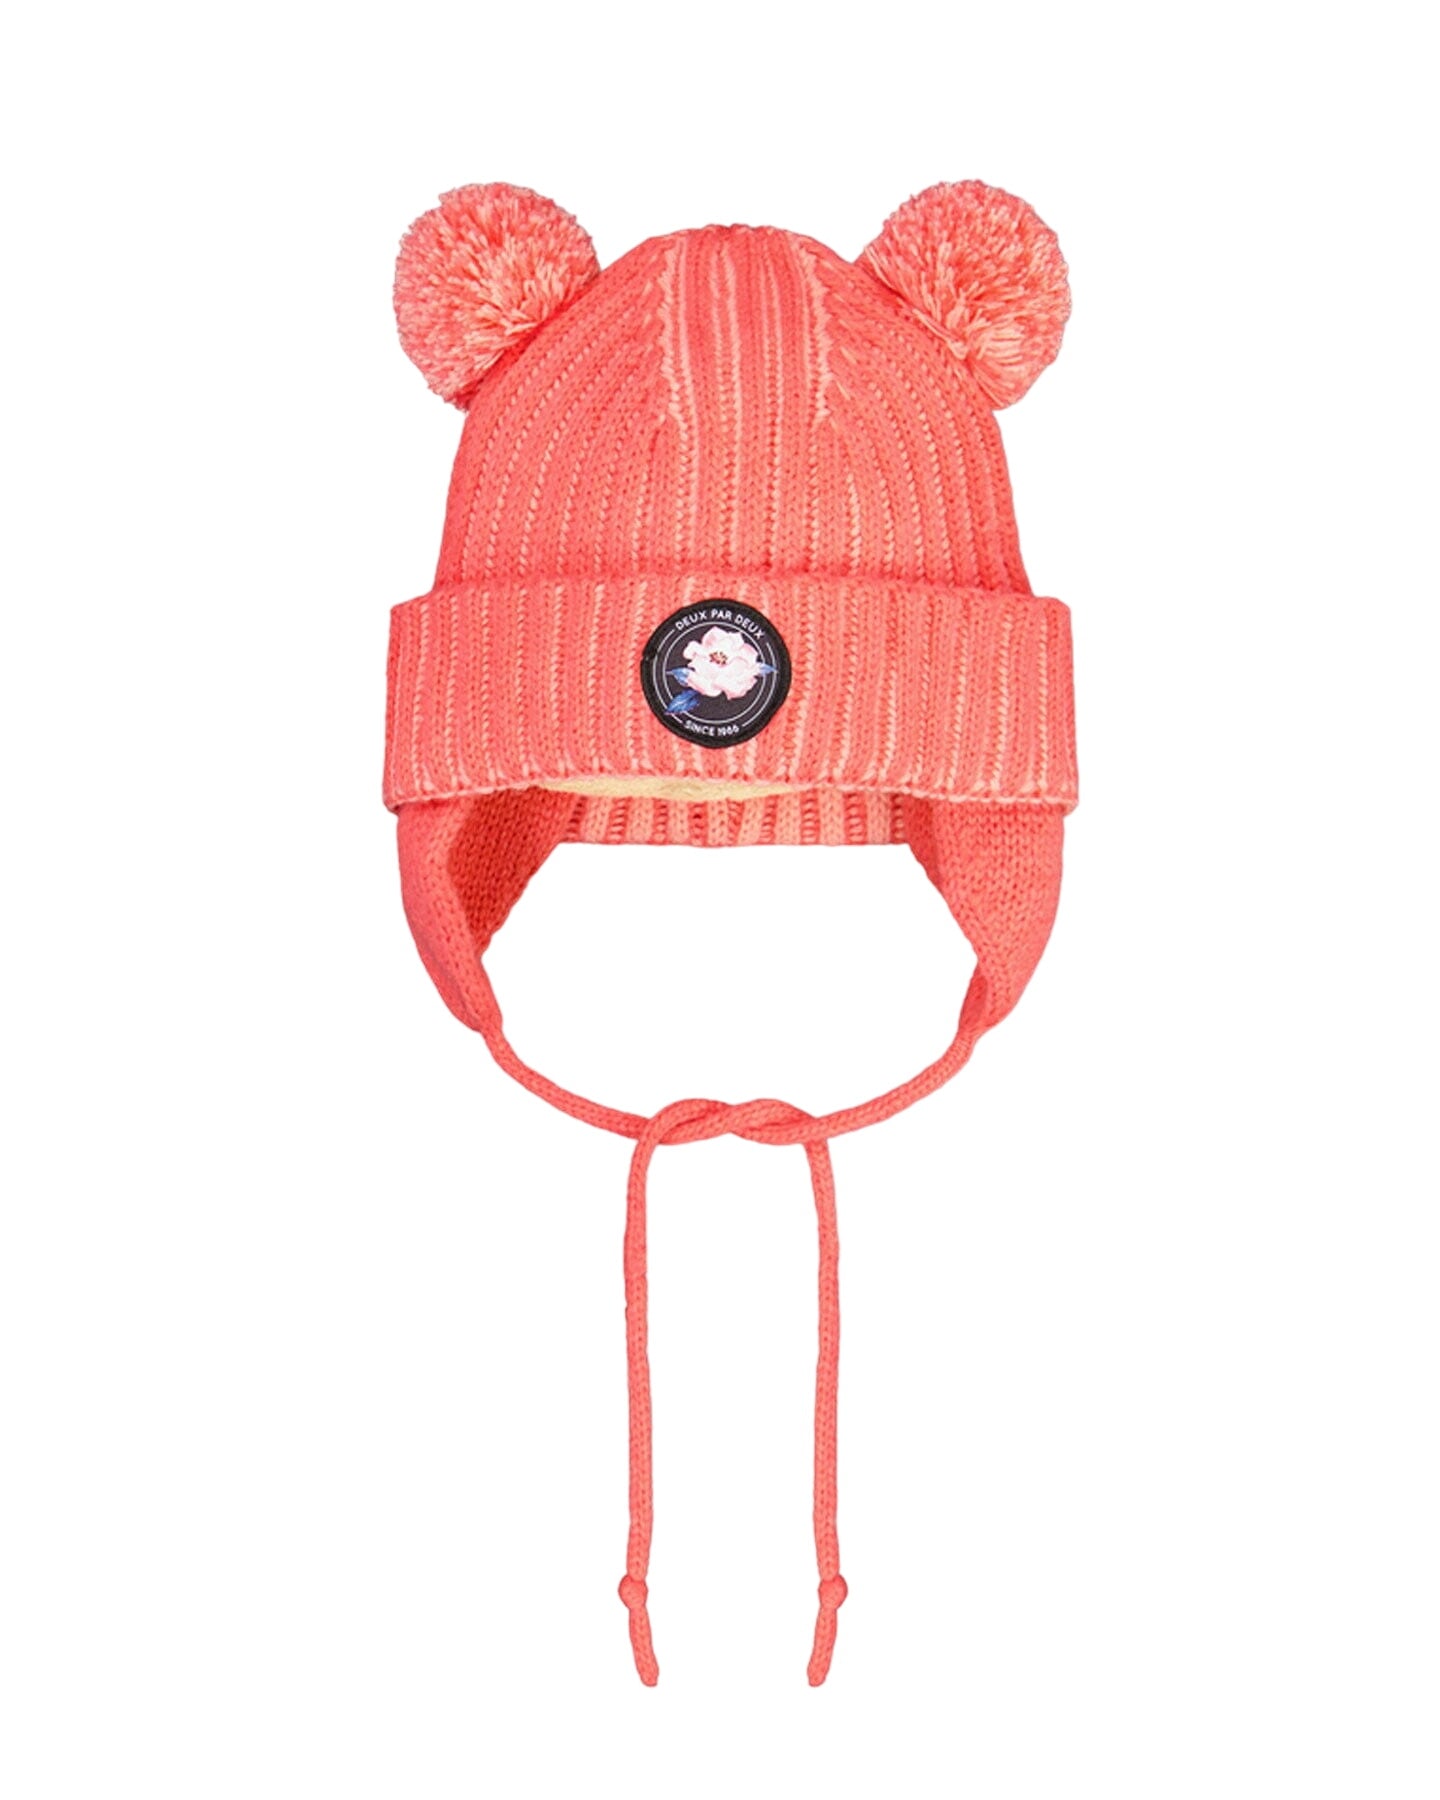 Two Pompoms Knit Hat With Earflap In Coral